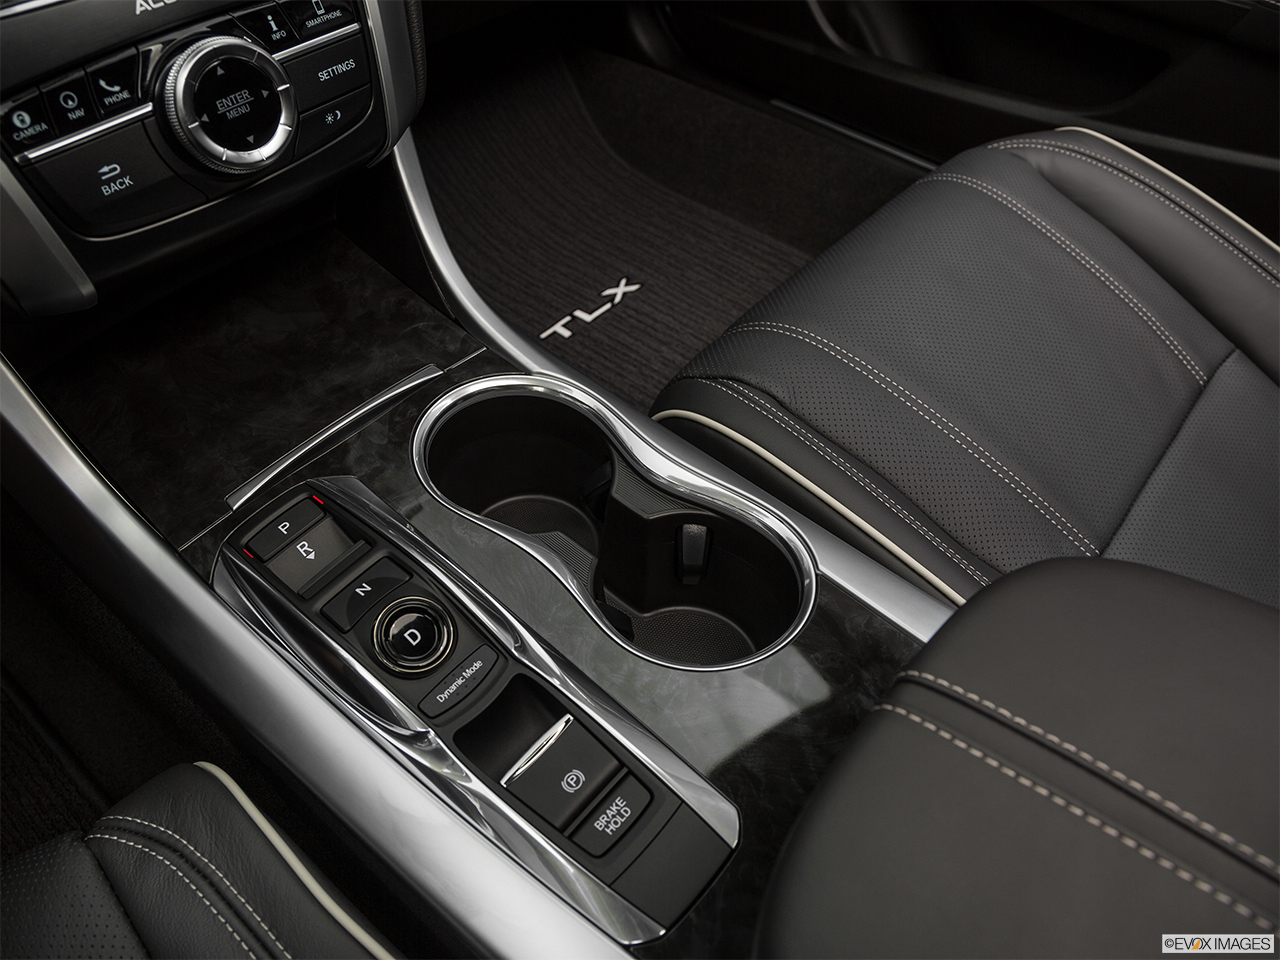 2018 Acura TLX 3.5L Cup holders. 